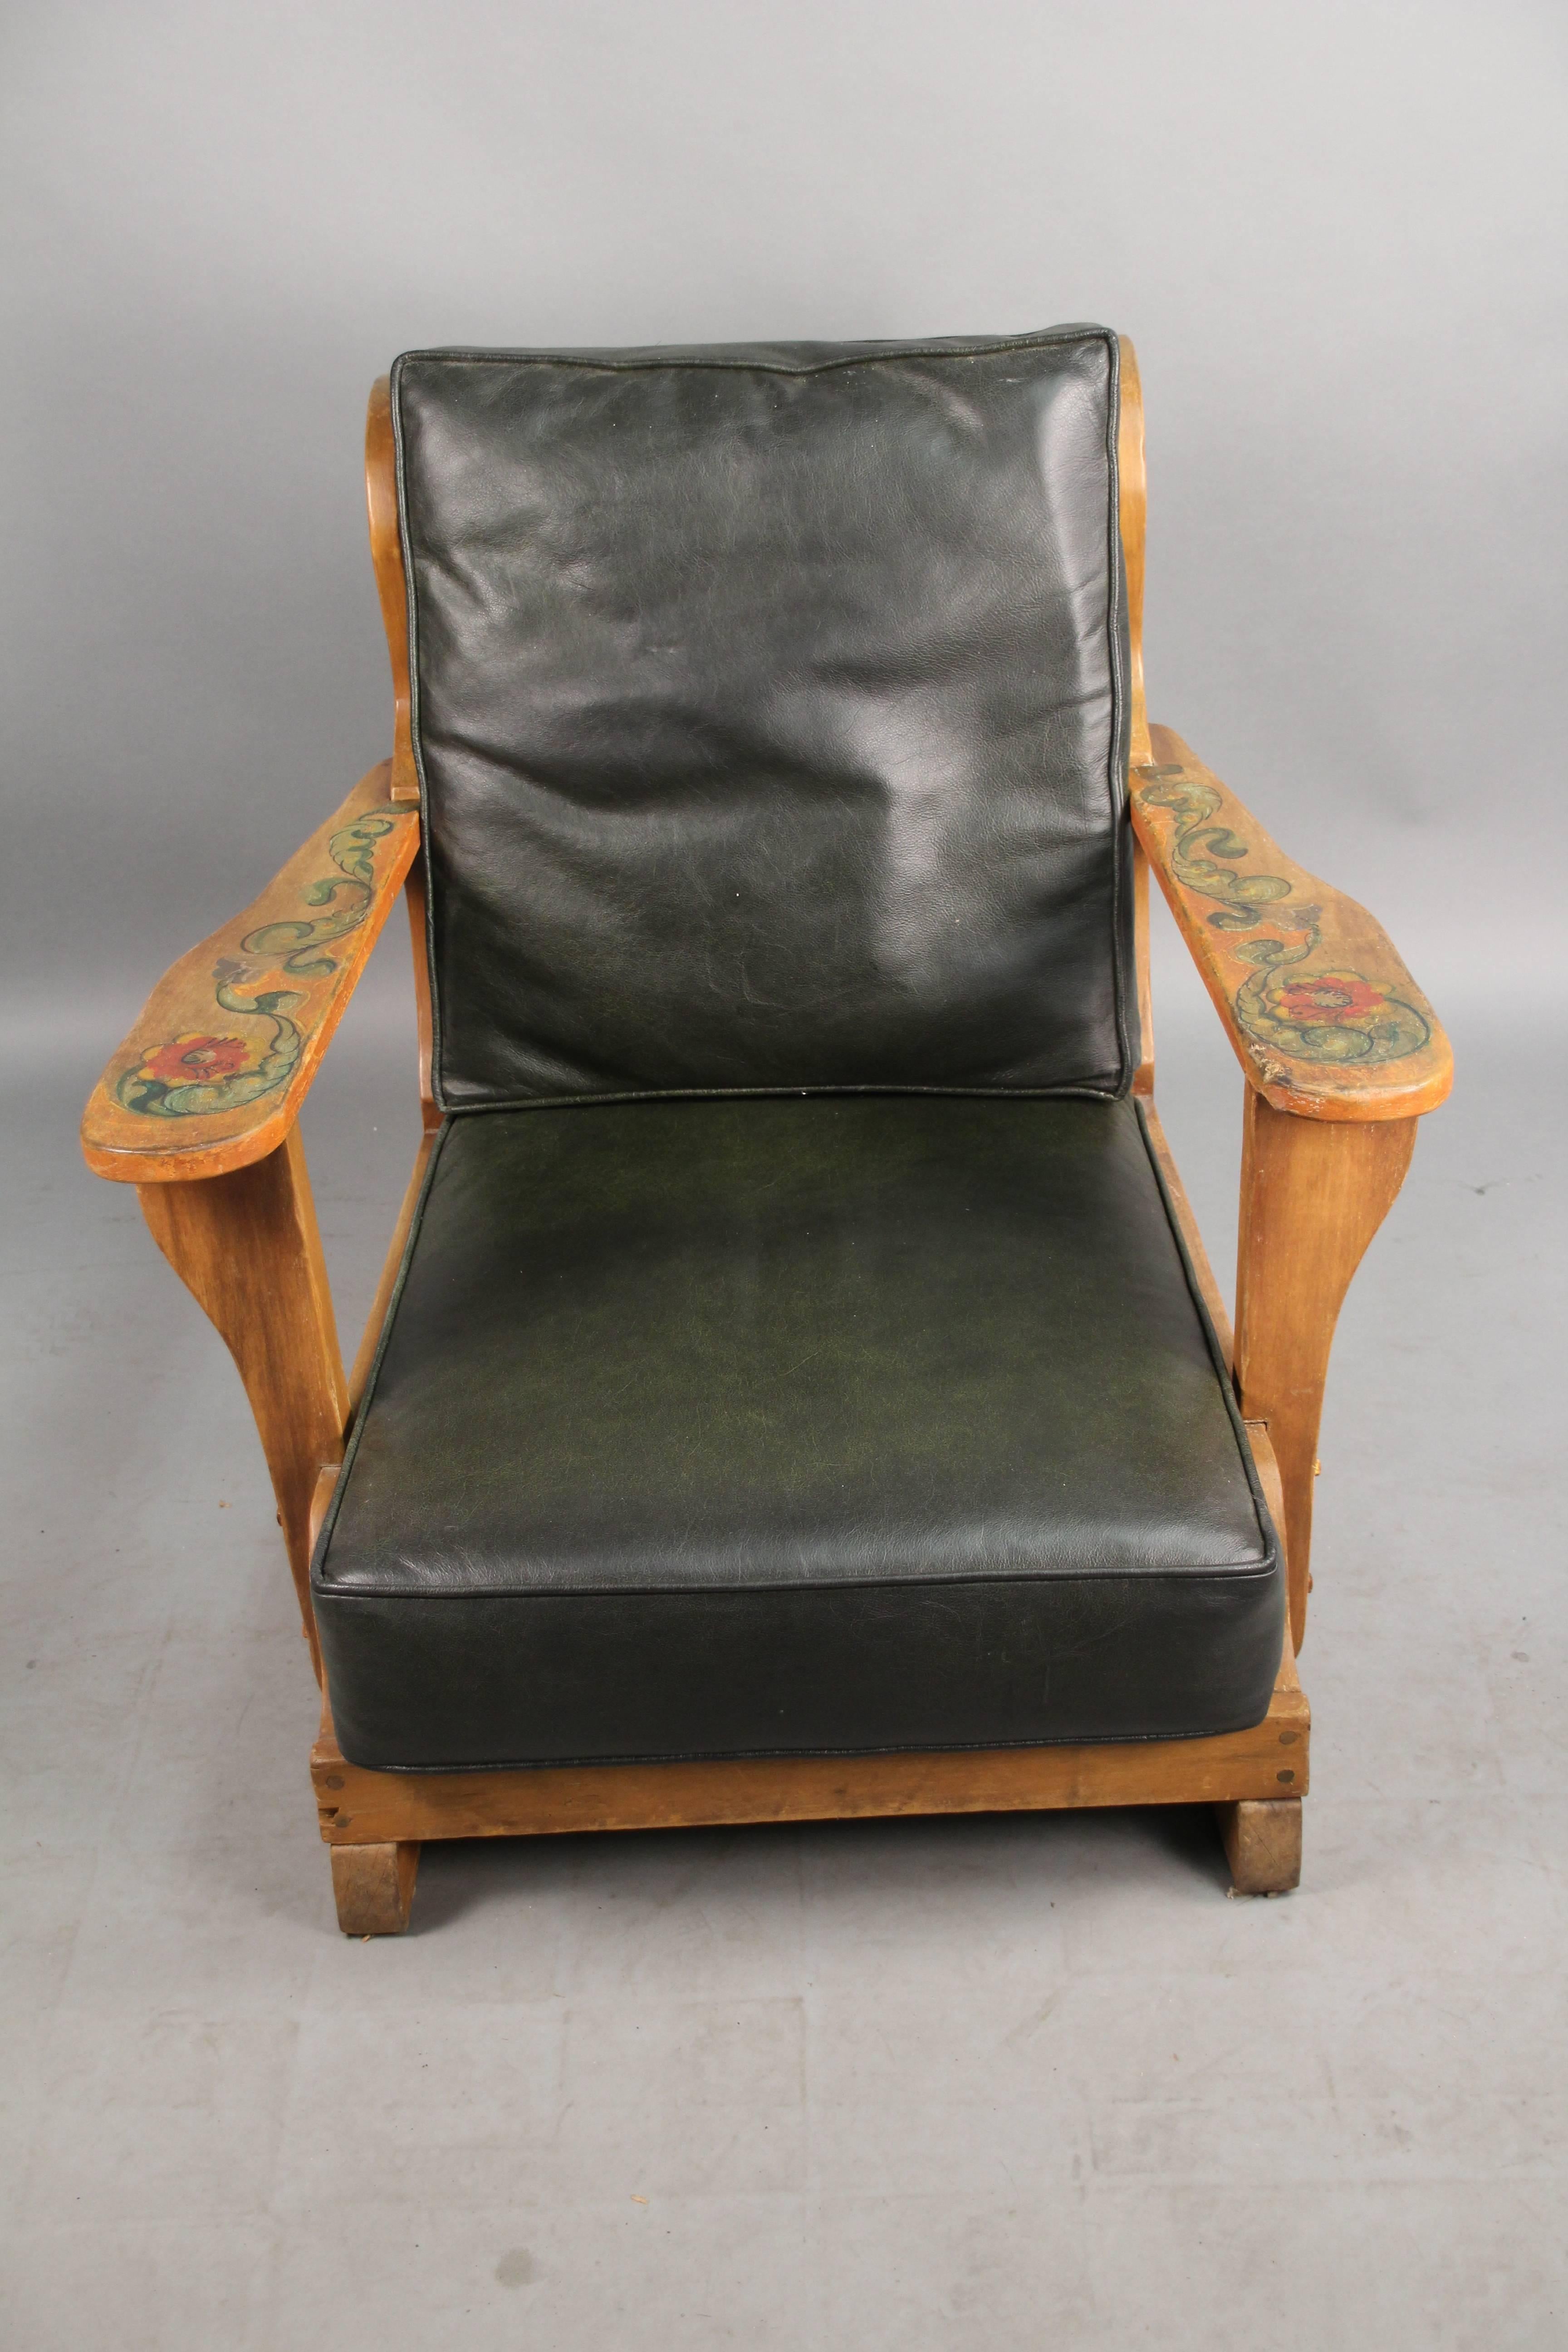 Armchair with painted flowers, circa 1930s. Signed. New leather upholstery.